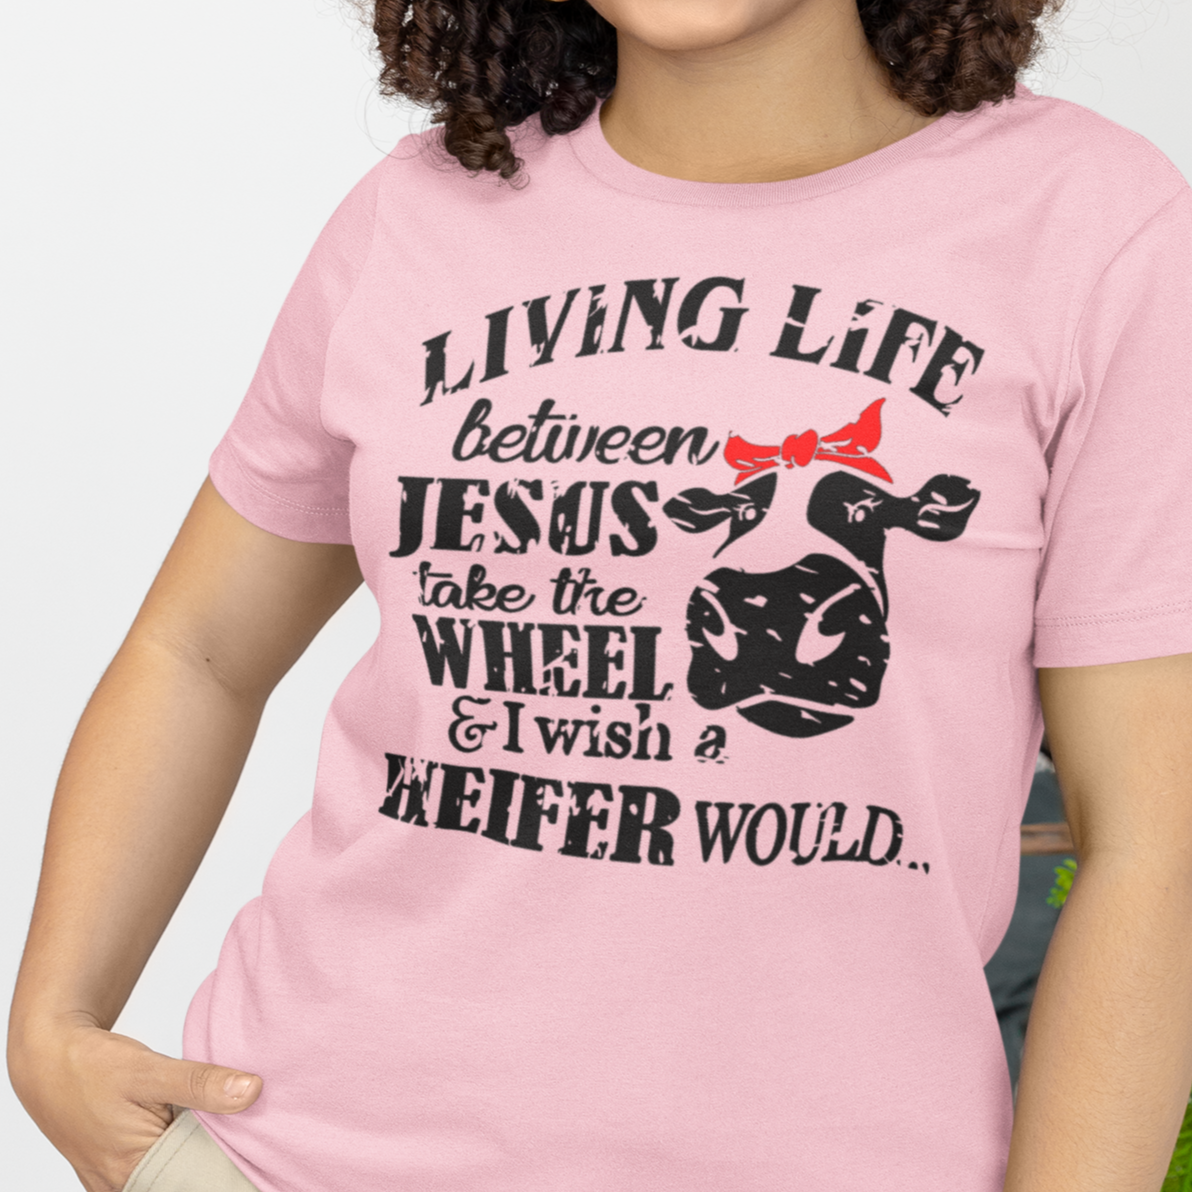 living-life-between-jesus-take-the-wheel-and-i-wish-a-heifer-would-pink-t-shirt-bella-canvas-tee-mockup-featuring-a-smiling-woman-with-curly-hair